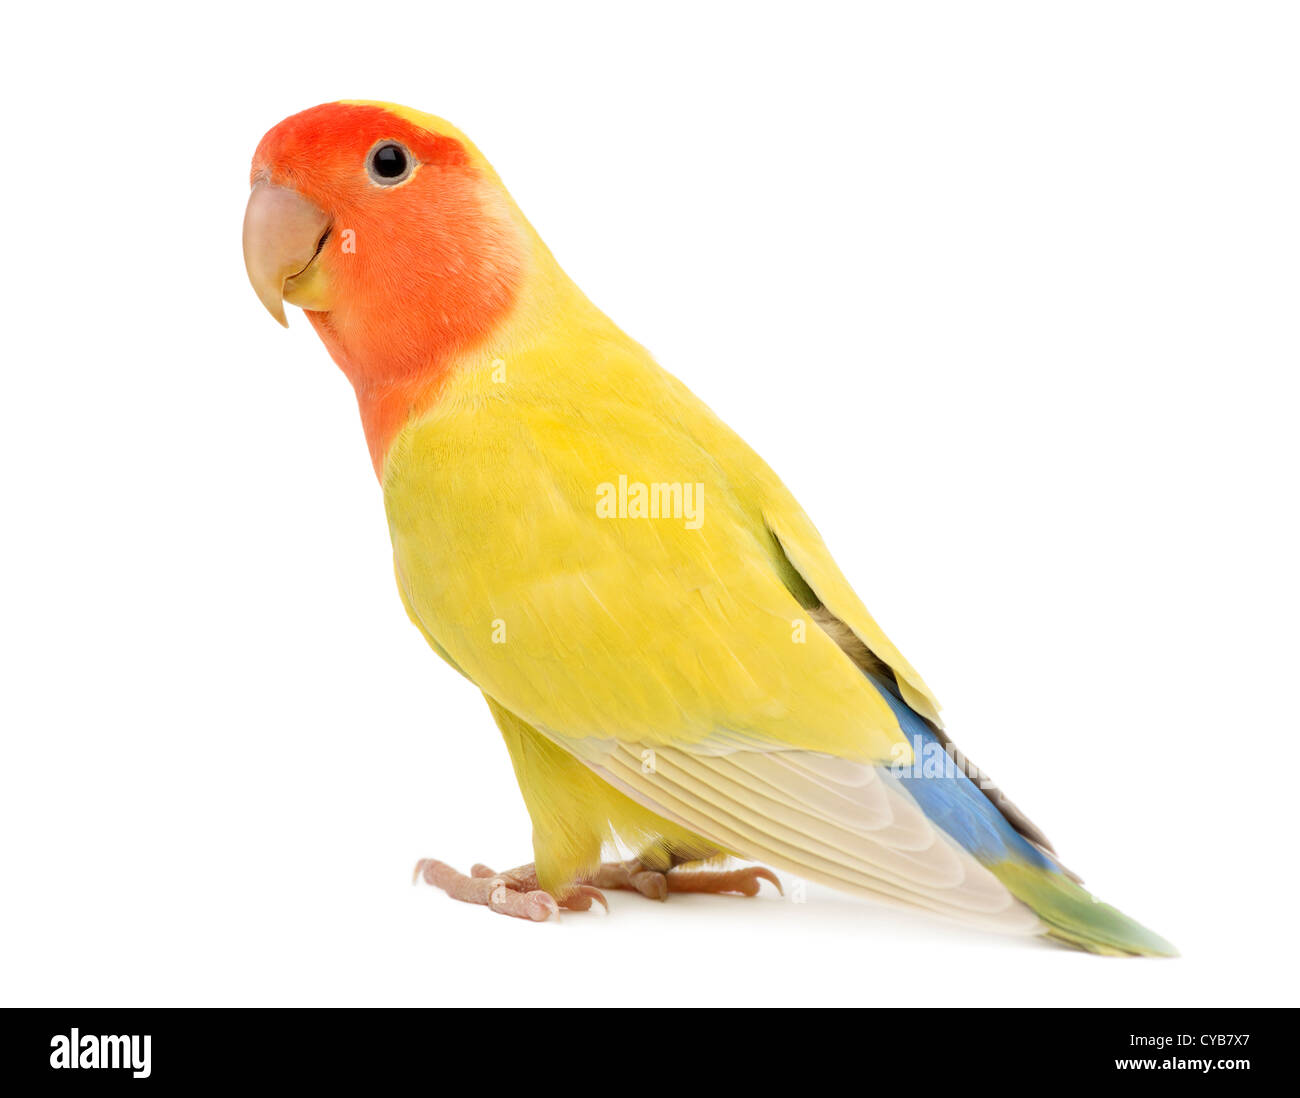 Rosy-faced Lovebird, Agapornis roseicollis, also known as the Peach-faced Lovebird against white background Stock Photo